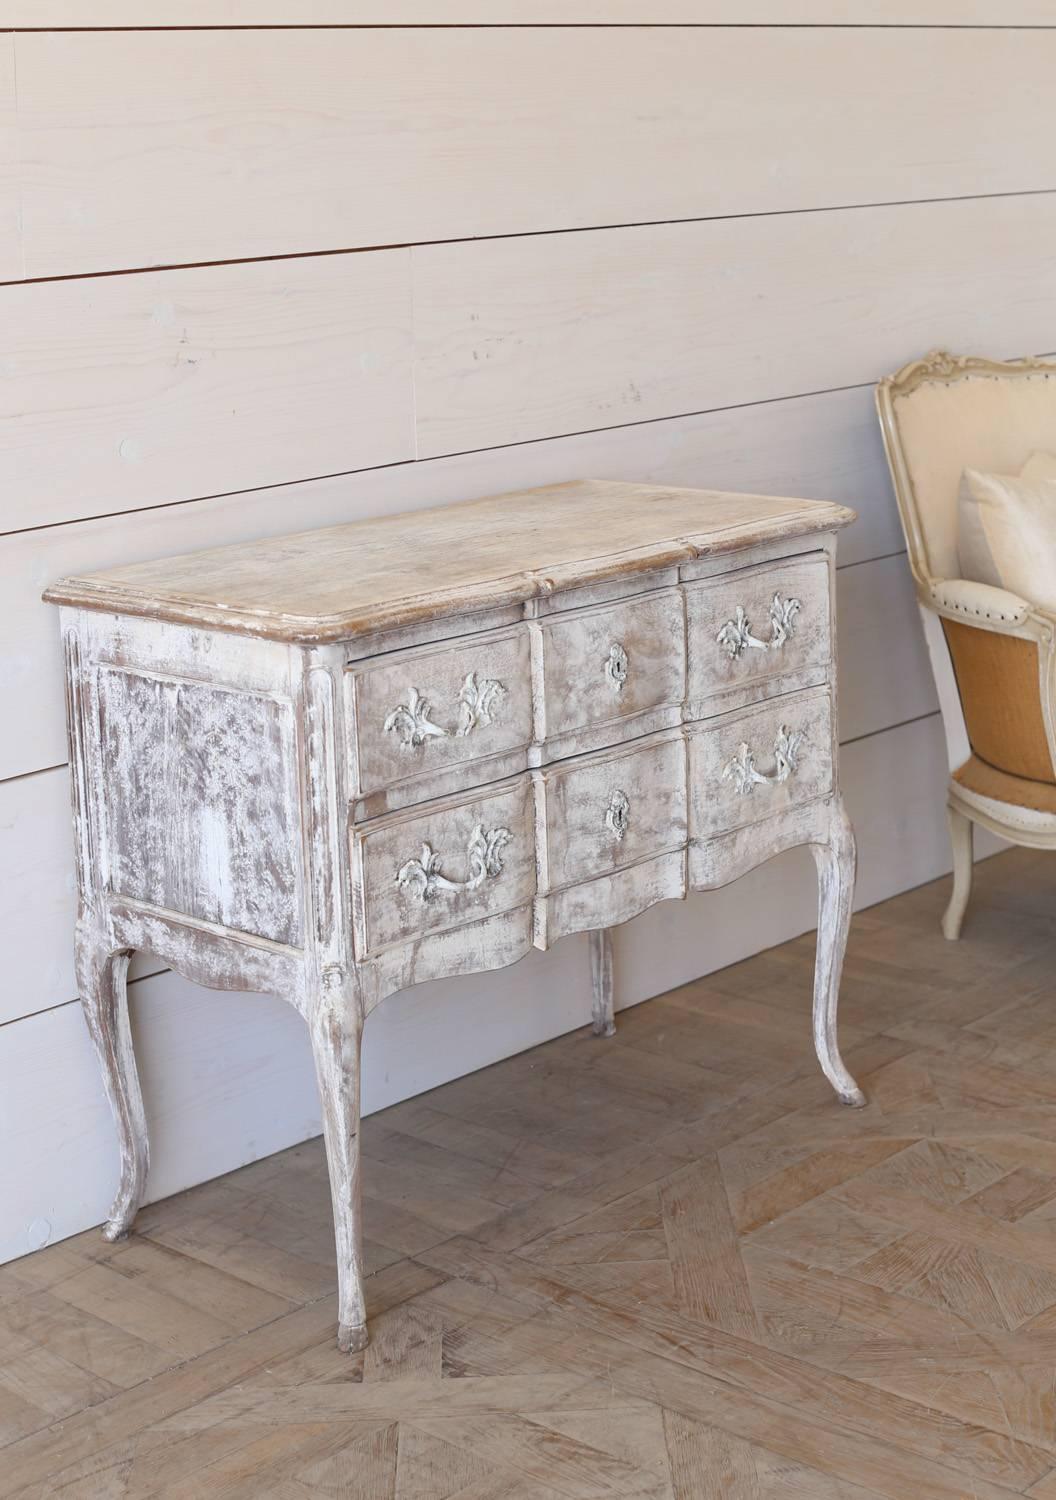 Lovely antique commode with two drawers. Elegant serpentine shape with original hardware in a fresh, warm white-washed finish.